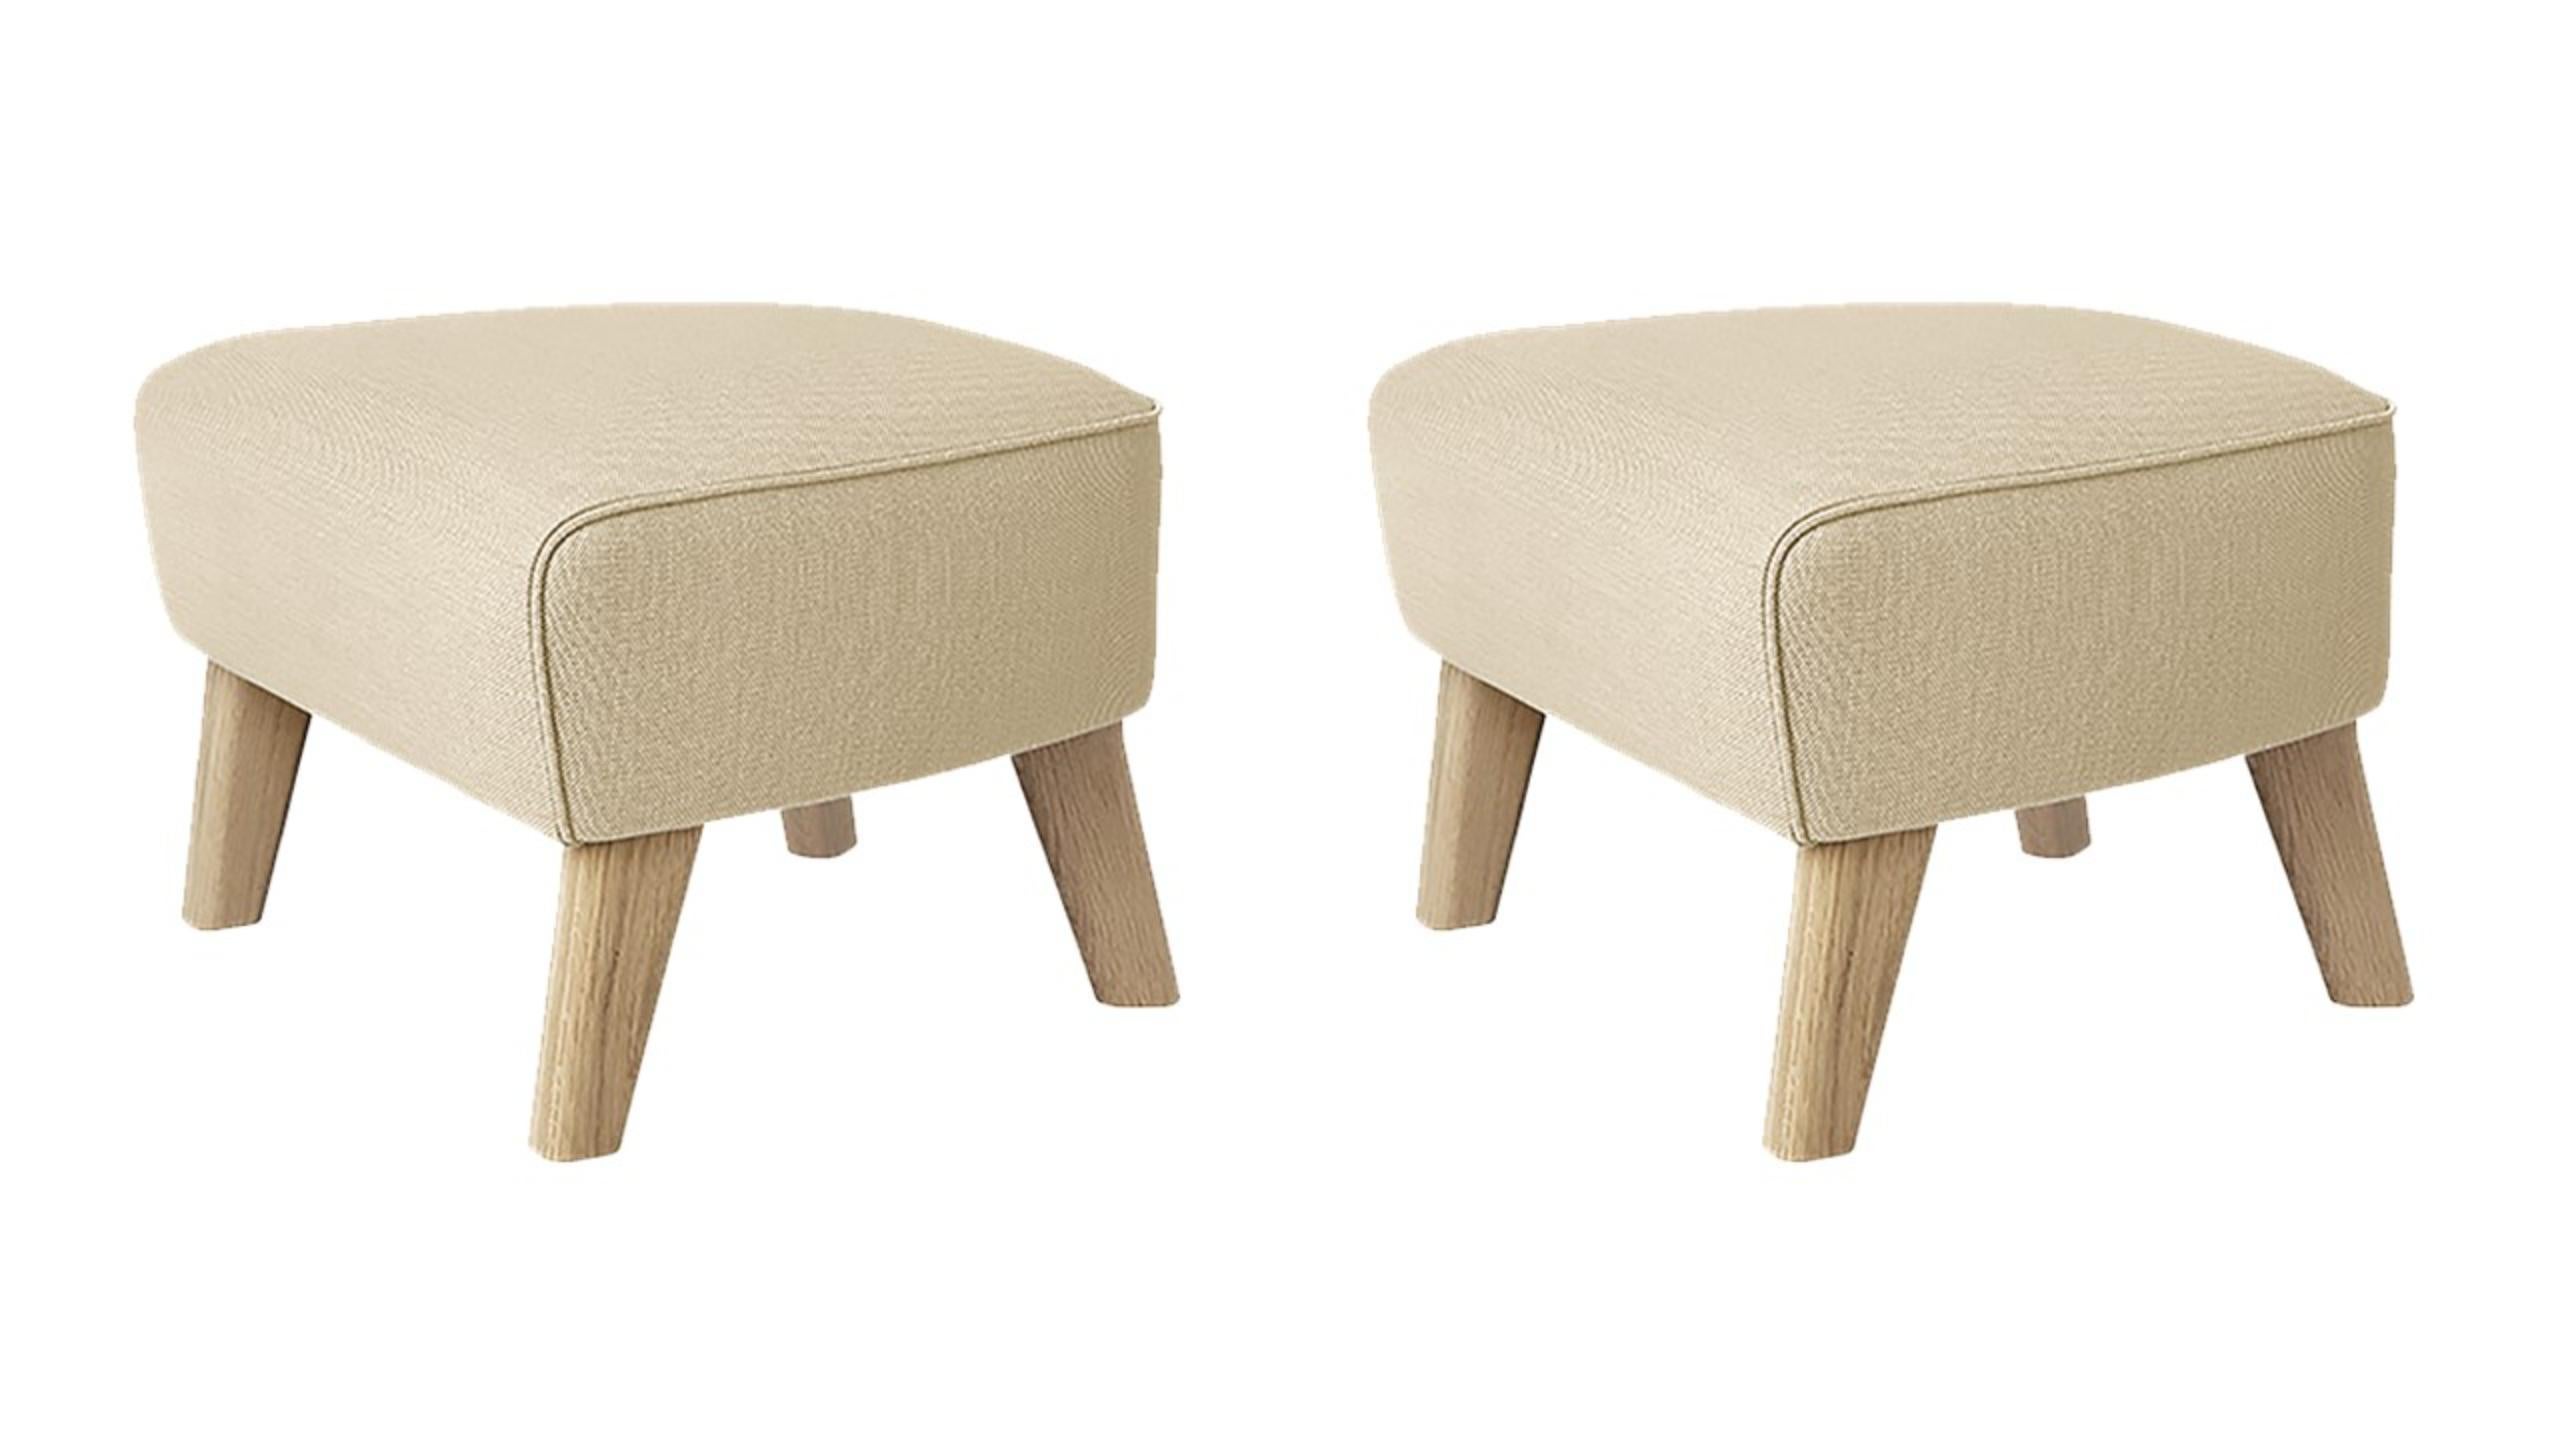 Set of 2 sand and natural oak Sahco Zero footstool by Lassen
Dimensions: W 56 x D 58 x H 40 cm 
Materials: Textile
Also Available: Other colors available.

The my own chair footstool has been designed in the same spirit as Flemming Lassen’s